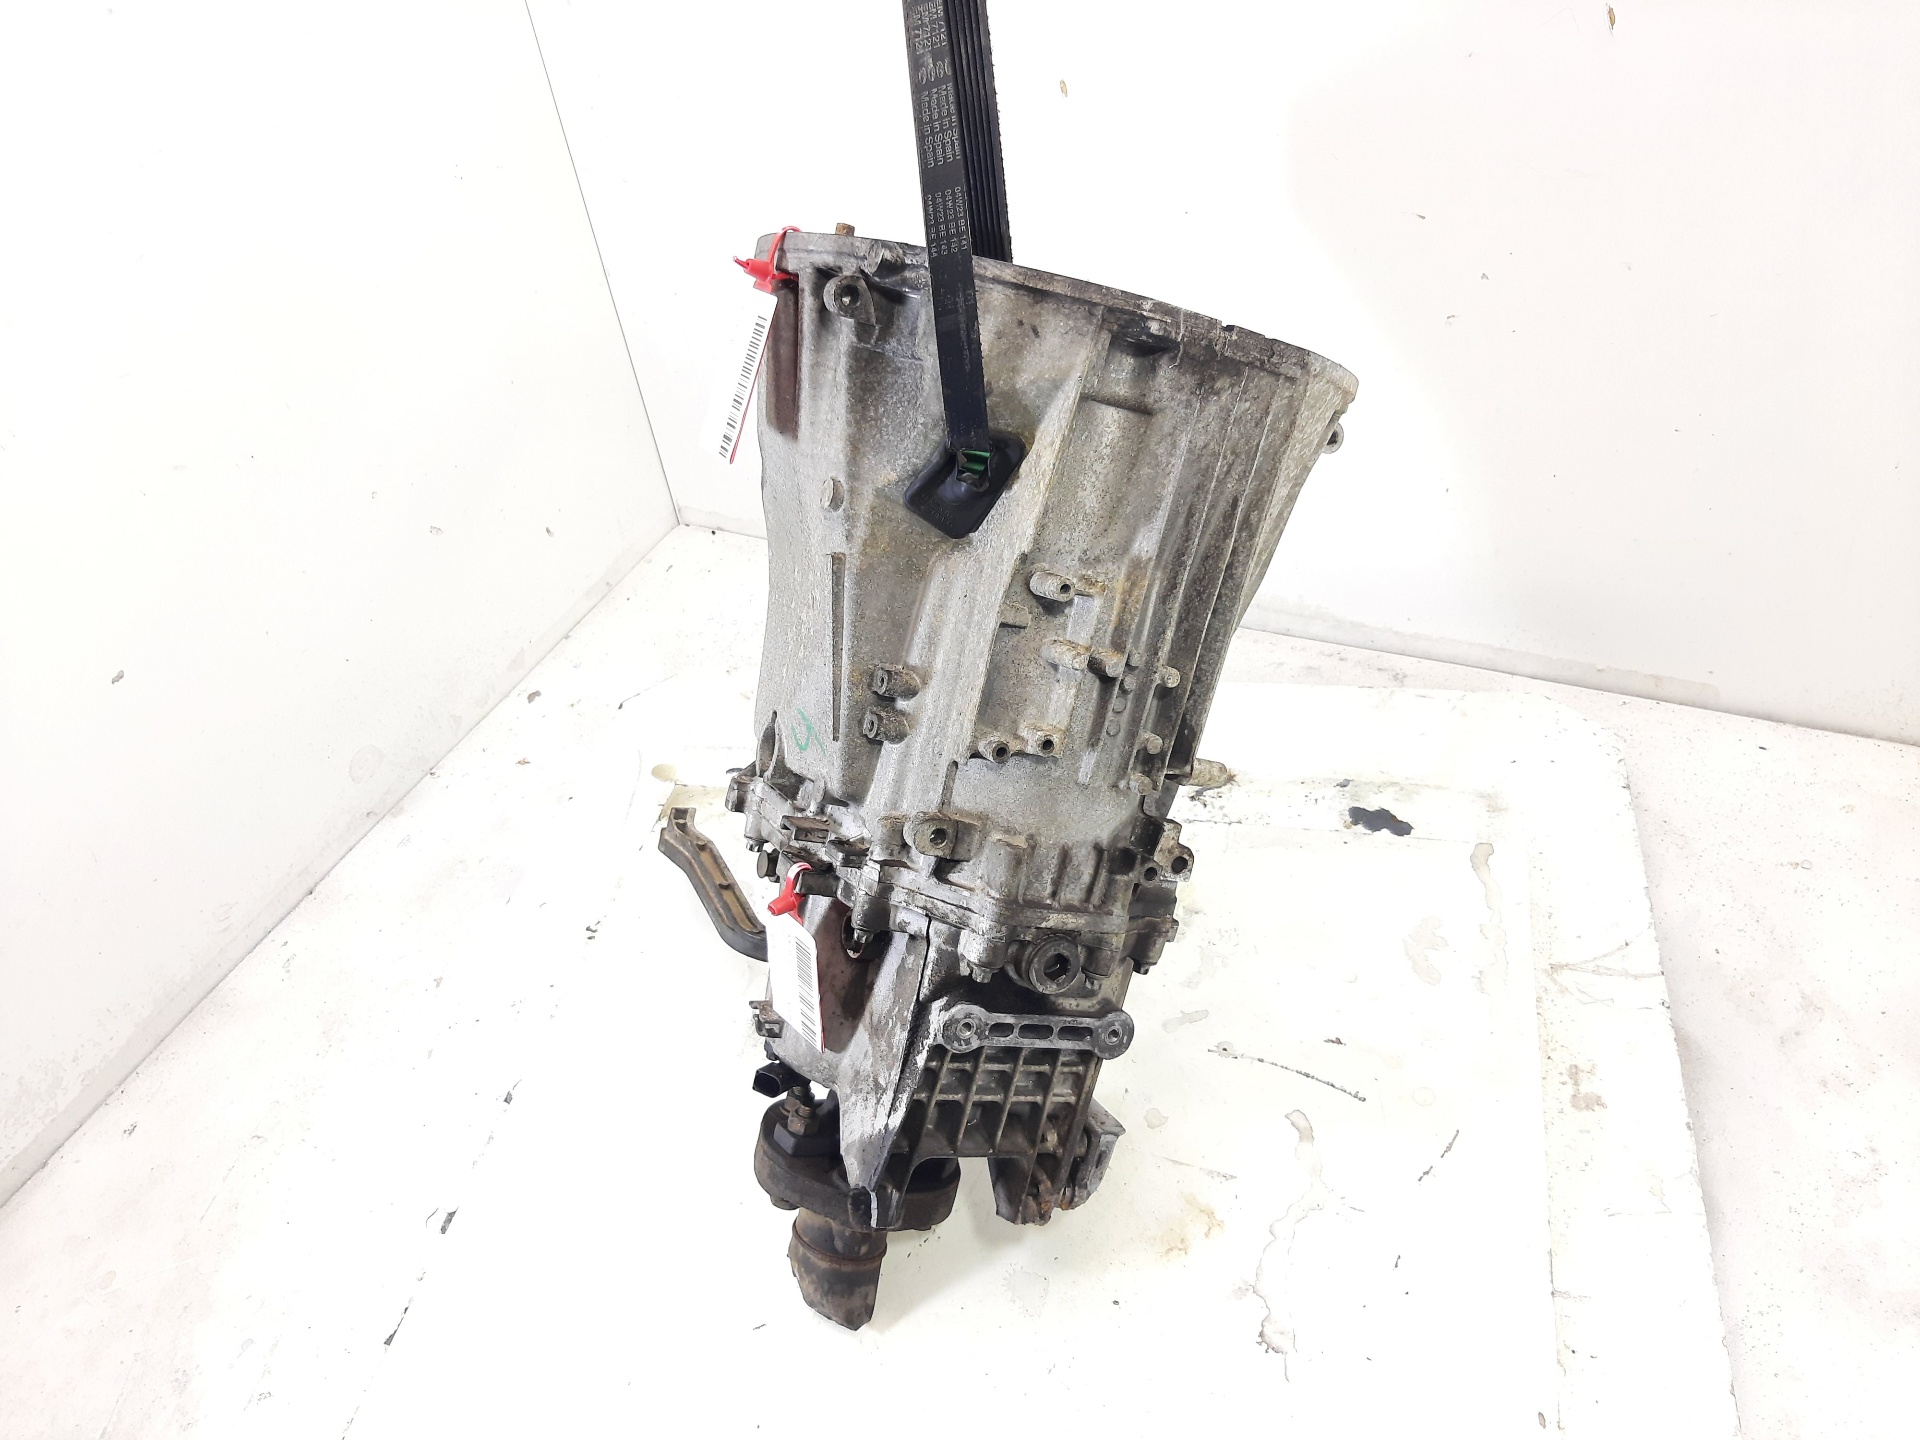 MERCEDES-BENZ C-Class W203/S203/CL203 (2000-2008) Gearbox R2112610301, 6VELOCIDADES 22330531